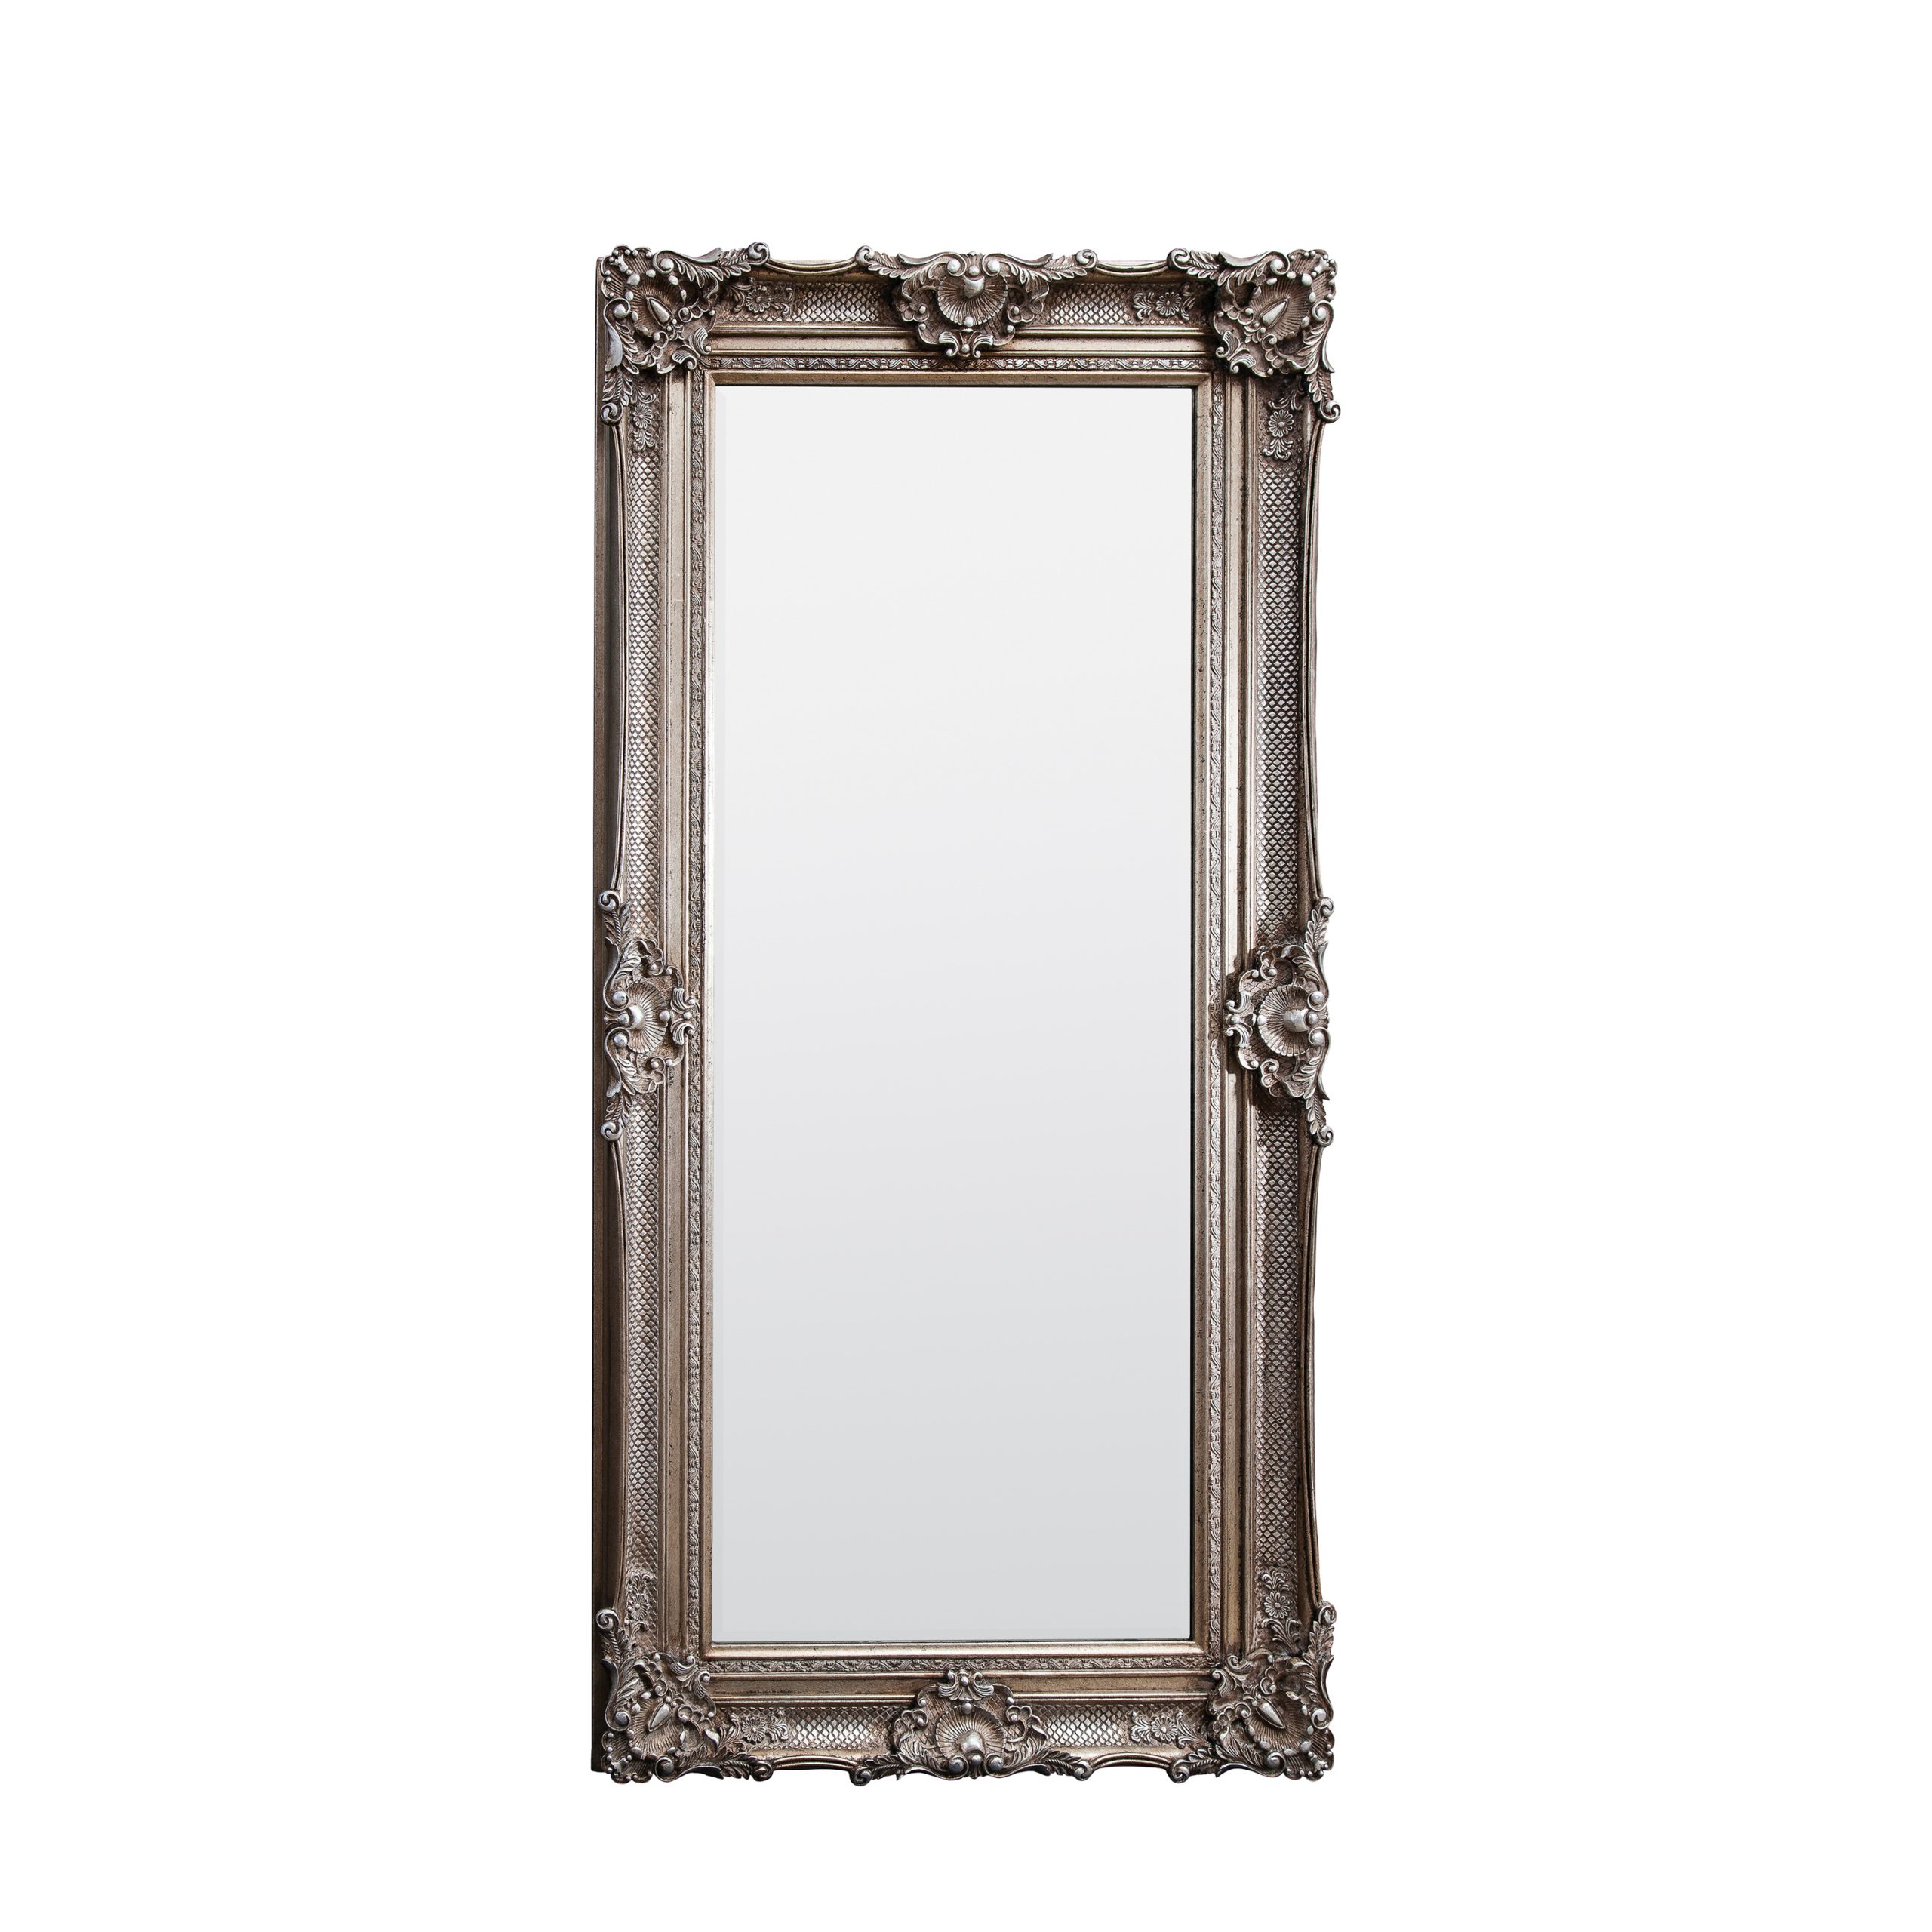 Gallery Direct Stretton Leaner Mirror Silver | Shackletons